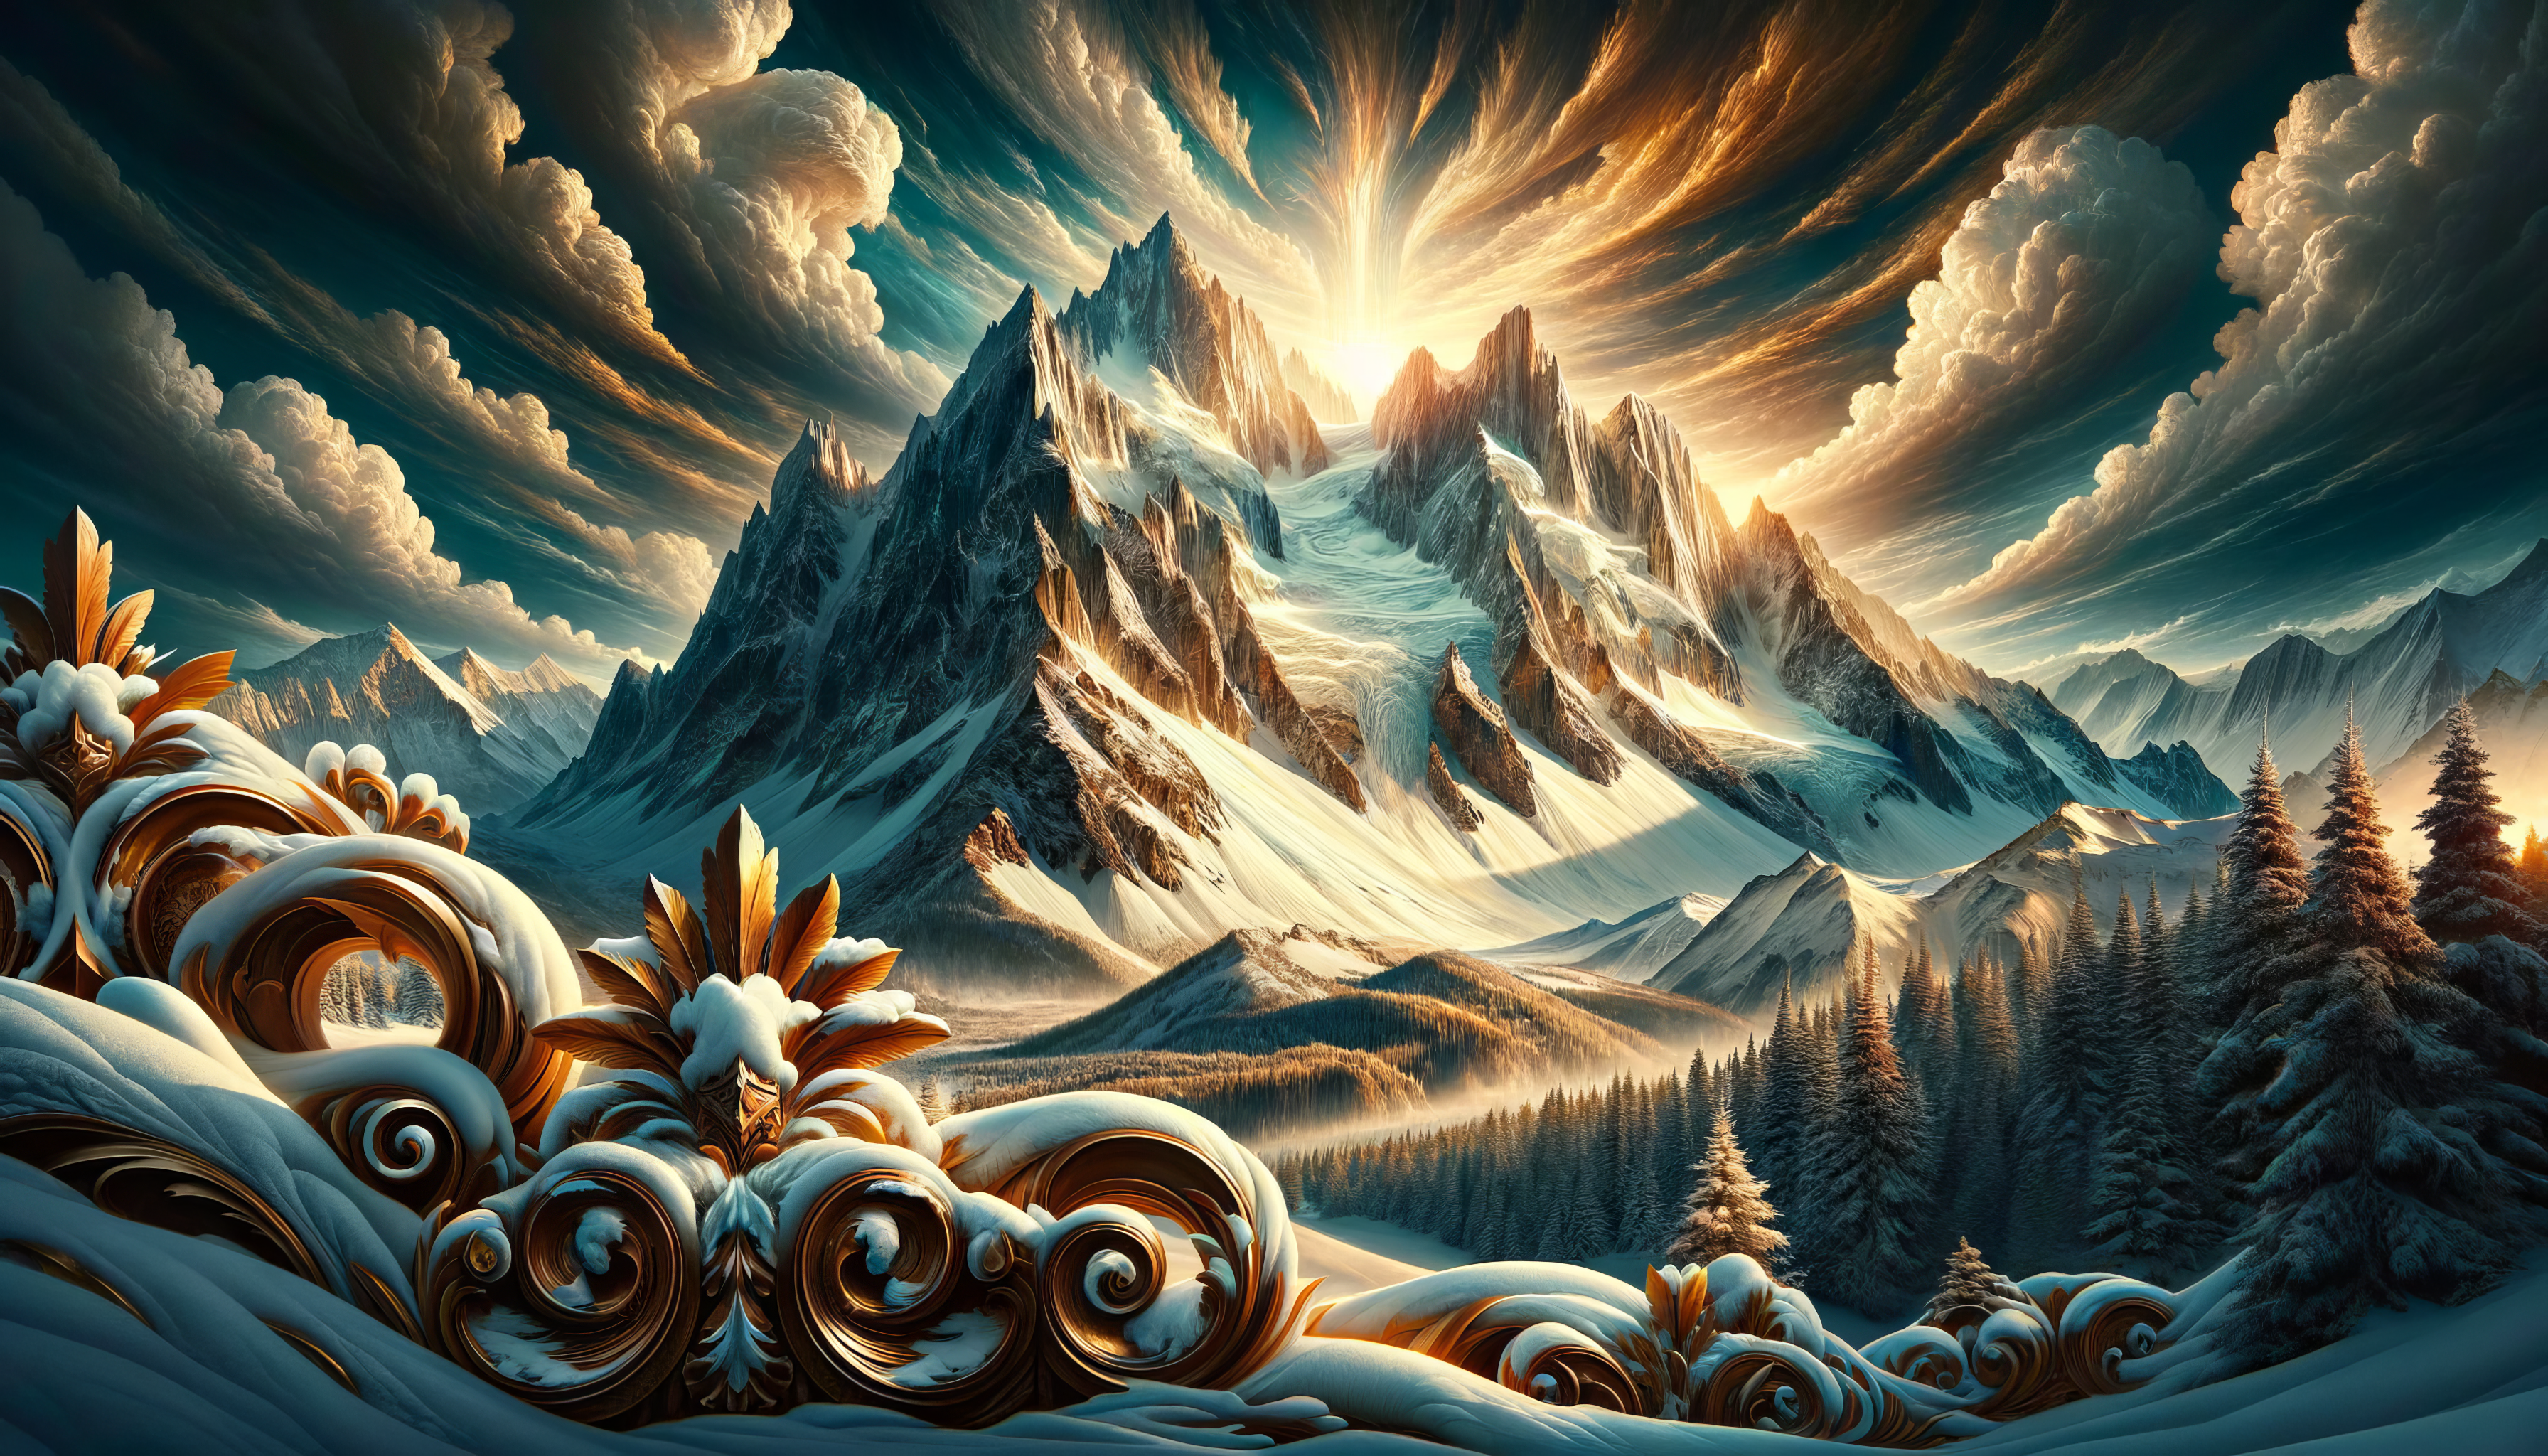 HD wallpaper featuring a majestic snowy mountain with ornate foreground designs and a vibrant sky, perfect for desktop backgrounds.